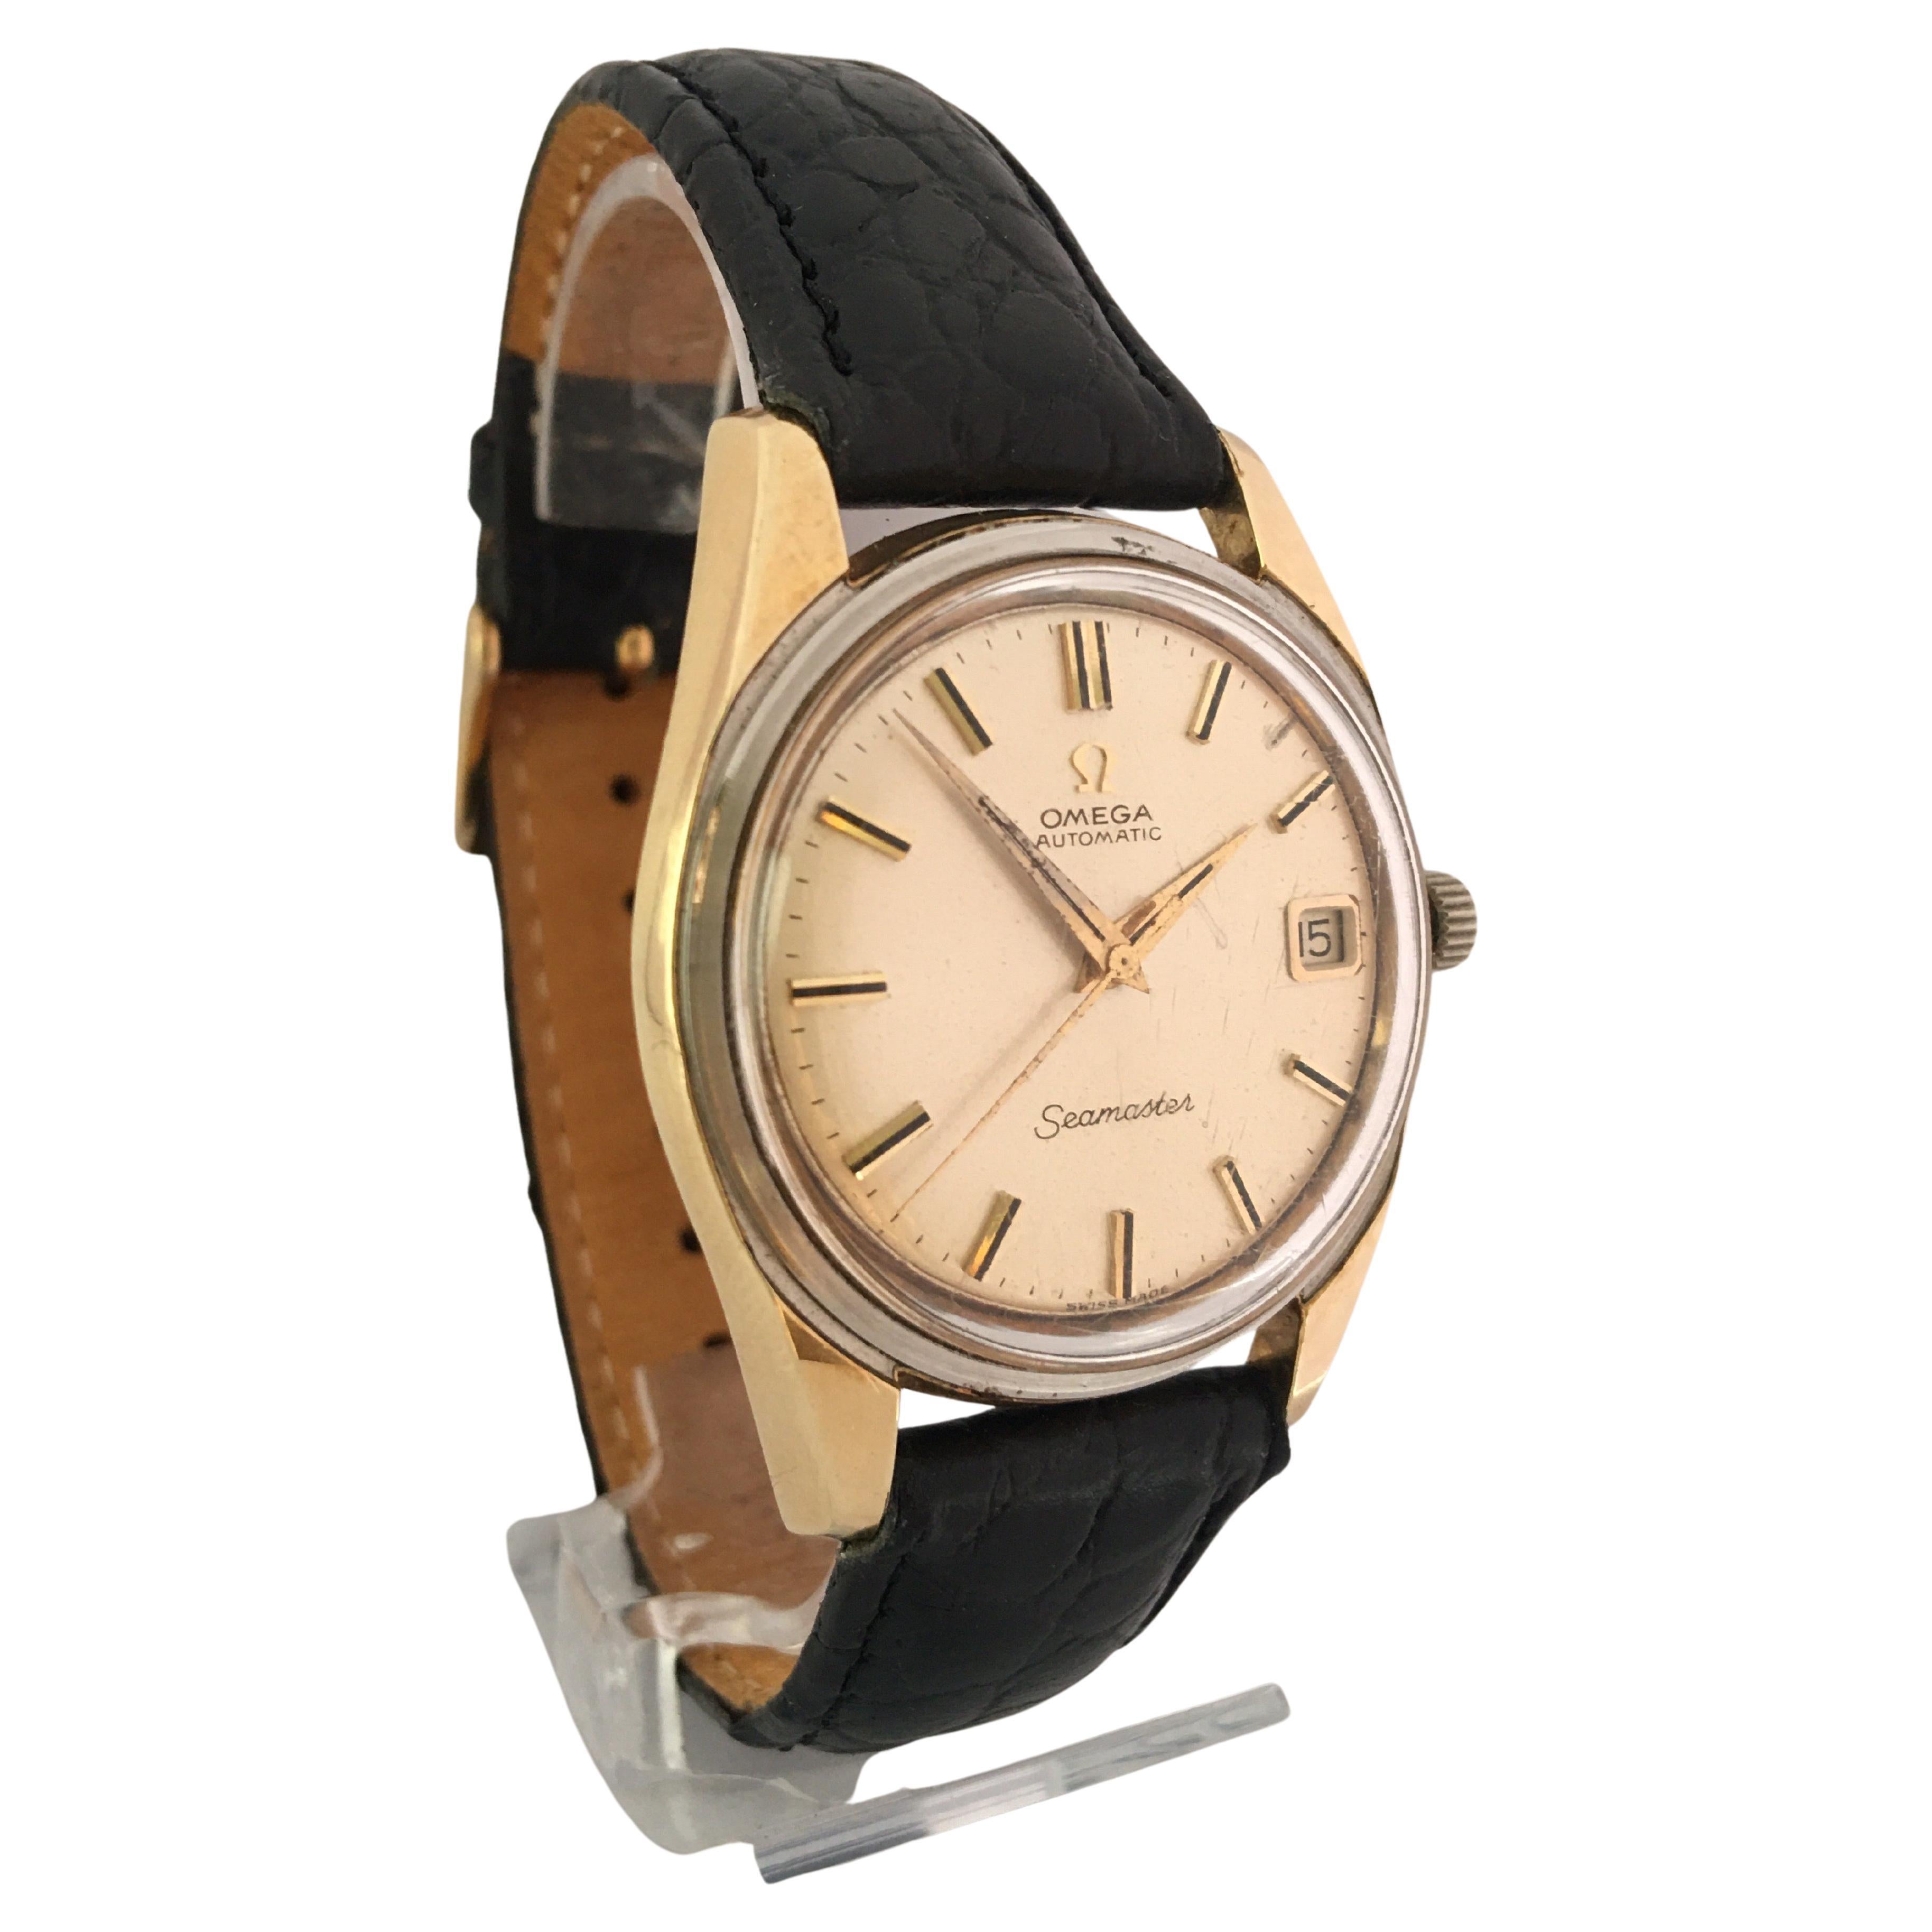 1960s Gold-Plated and Stainless Steel Omega Seamaster Automatic Wristwatch